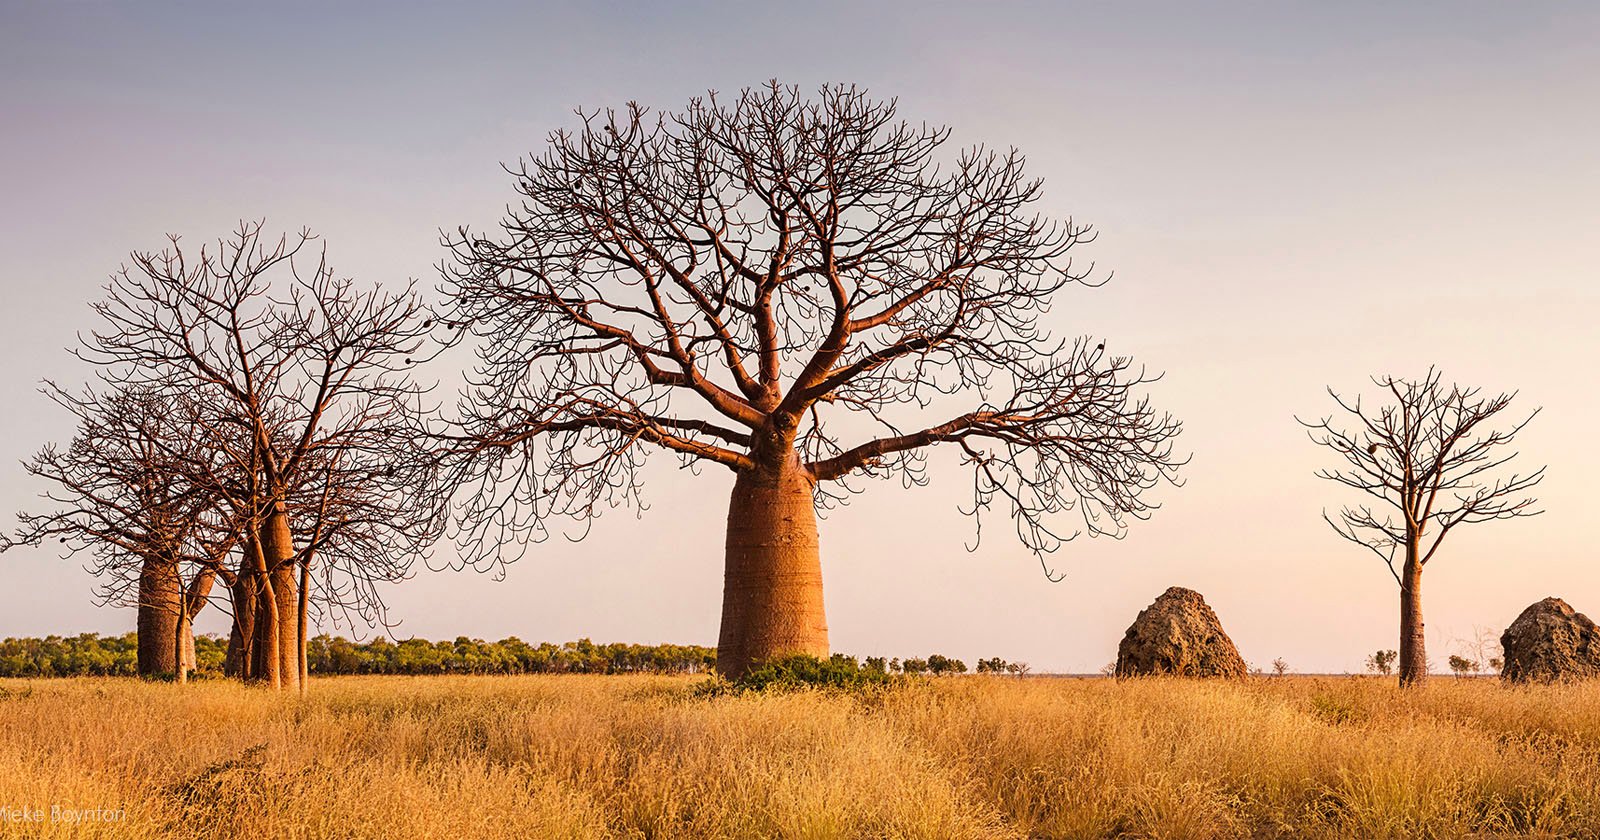 Talking to Trees: Photographing the Expressive Nature of Trees